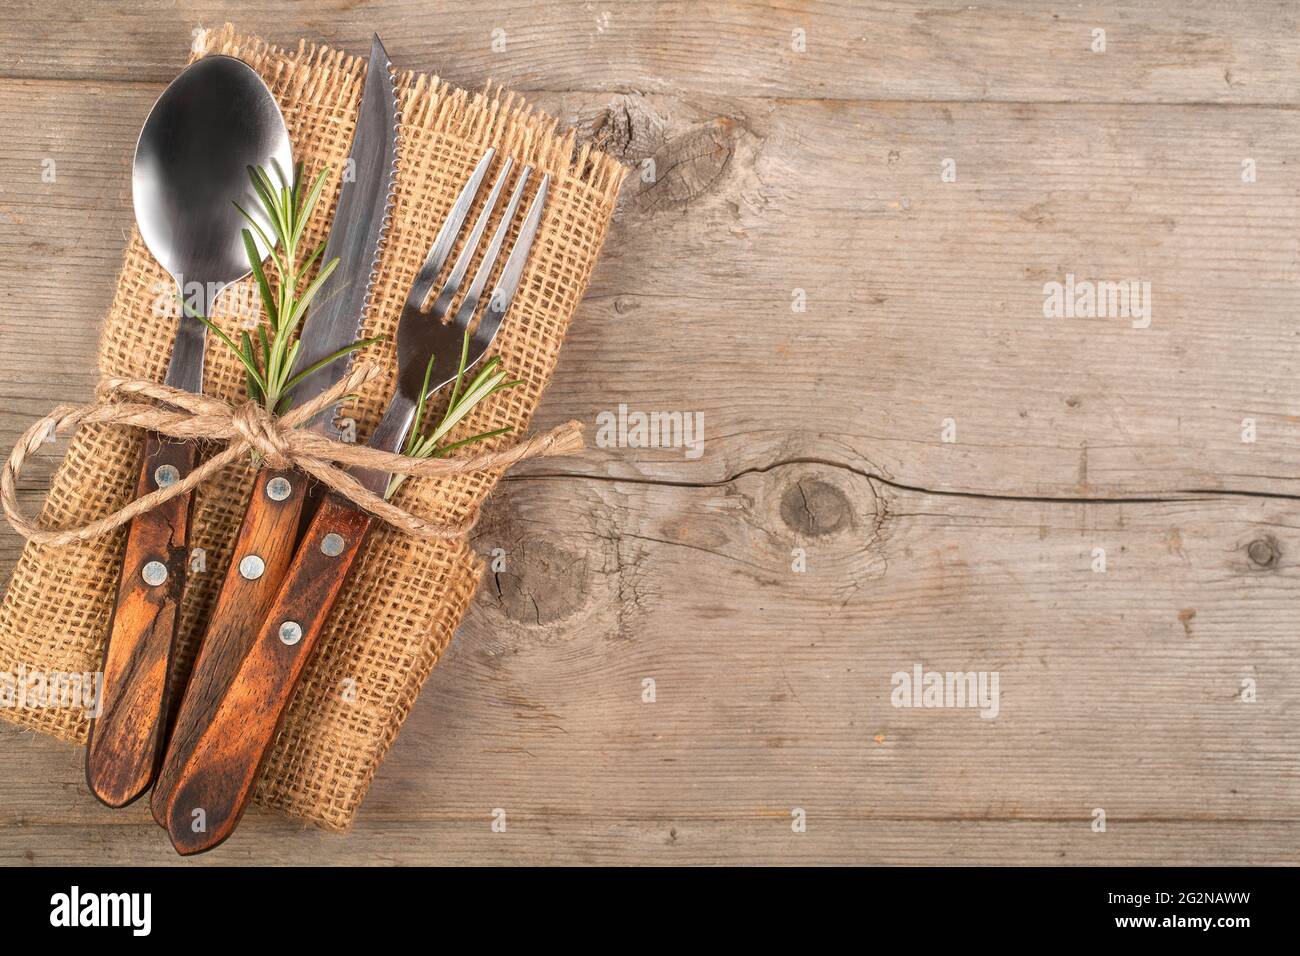 Spoon, fork, and knife along with linen napkin on the wooden background, retro style. Dining set. Restaurant cutlery. Stock Photo